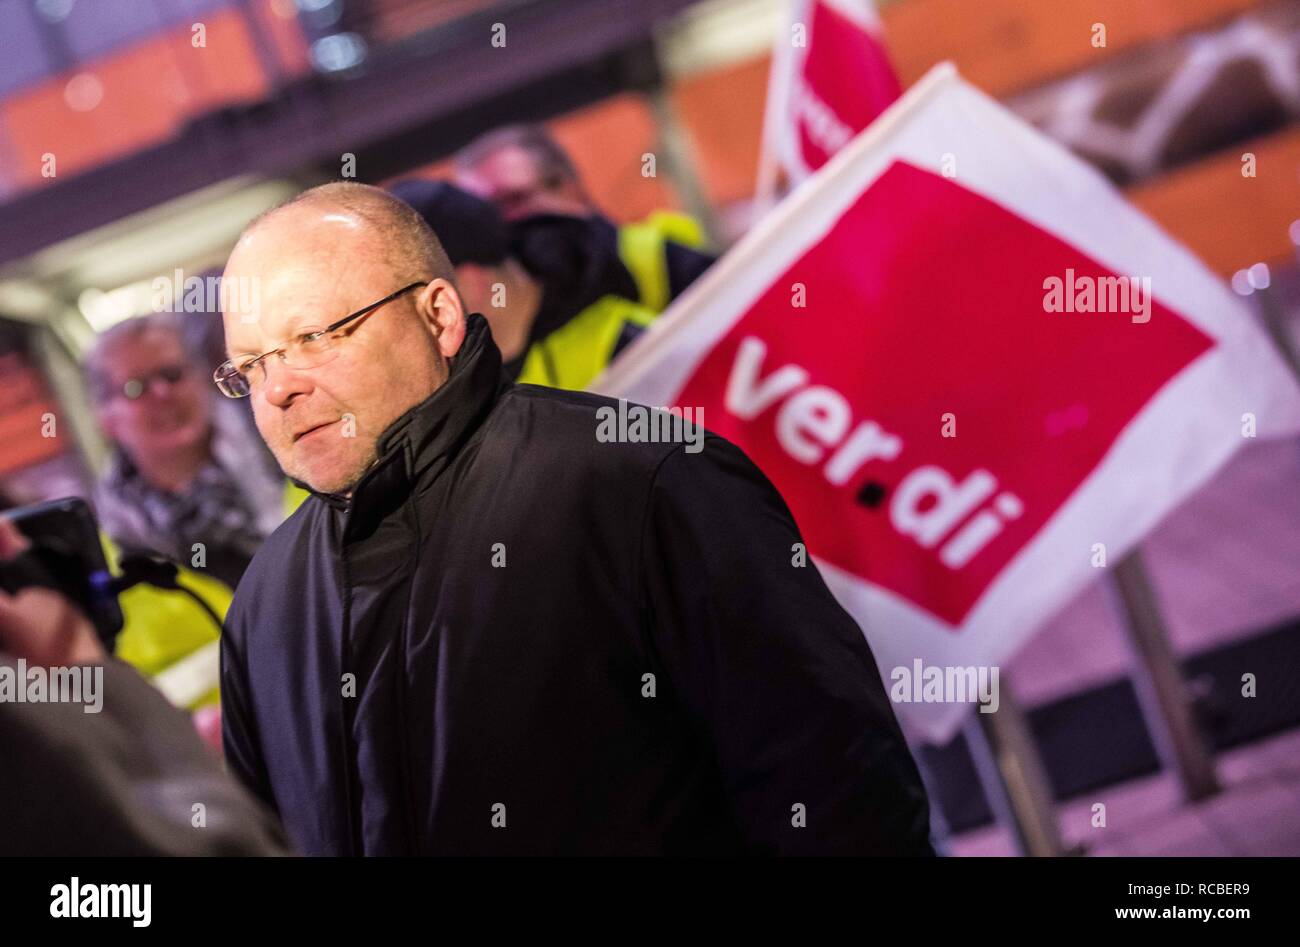 Munich, Bavaria, Germany. 15th Jan, 2019. Kai Winkler of the Verdi union at the Munich International Airport. Citing a breakdown in talks with employers on December 21st, the German Ver.di union organized the latest warning strike in a series at the Munich International Airport with members employed in Airport Security Services (Luftsicherheit) walking out from 3:30am to 24:00. The union is demanding 20 Euros per hour for their 1,000 total members working in Passenger-, Freight, Personnel, and Goods Control of Airport Security, along with recertification to bring other members to the same Stock Photo